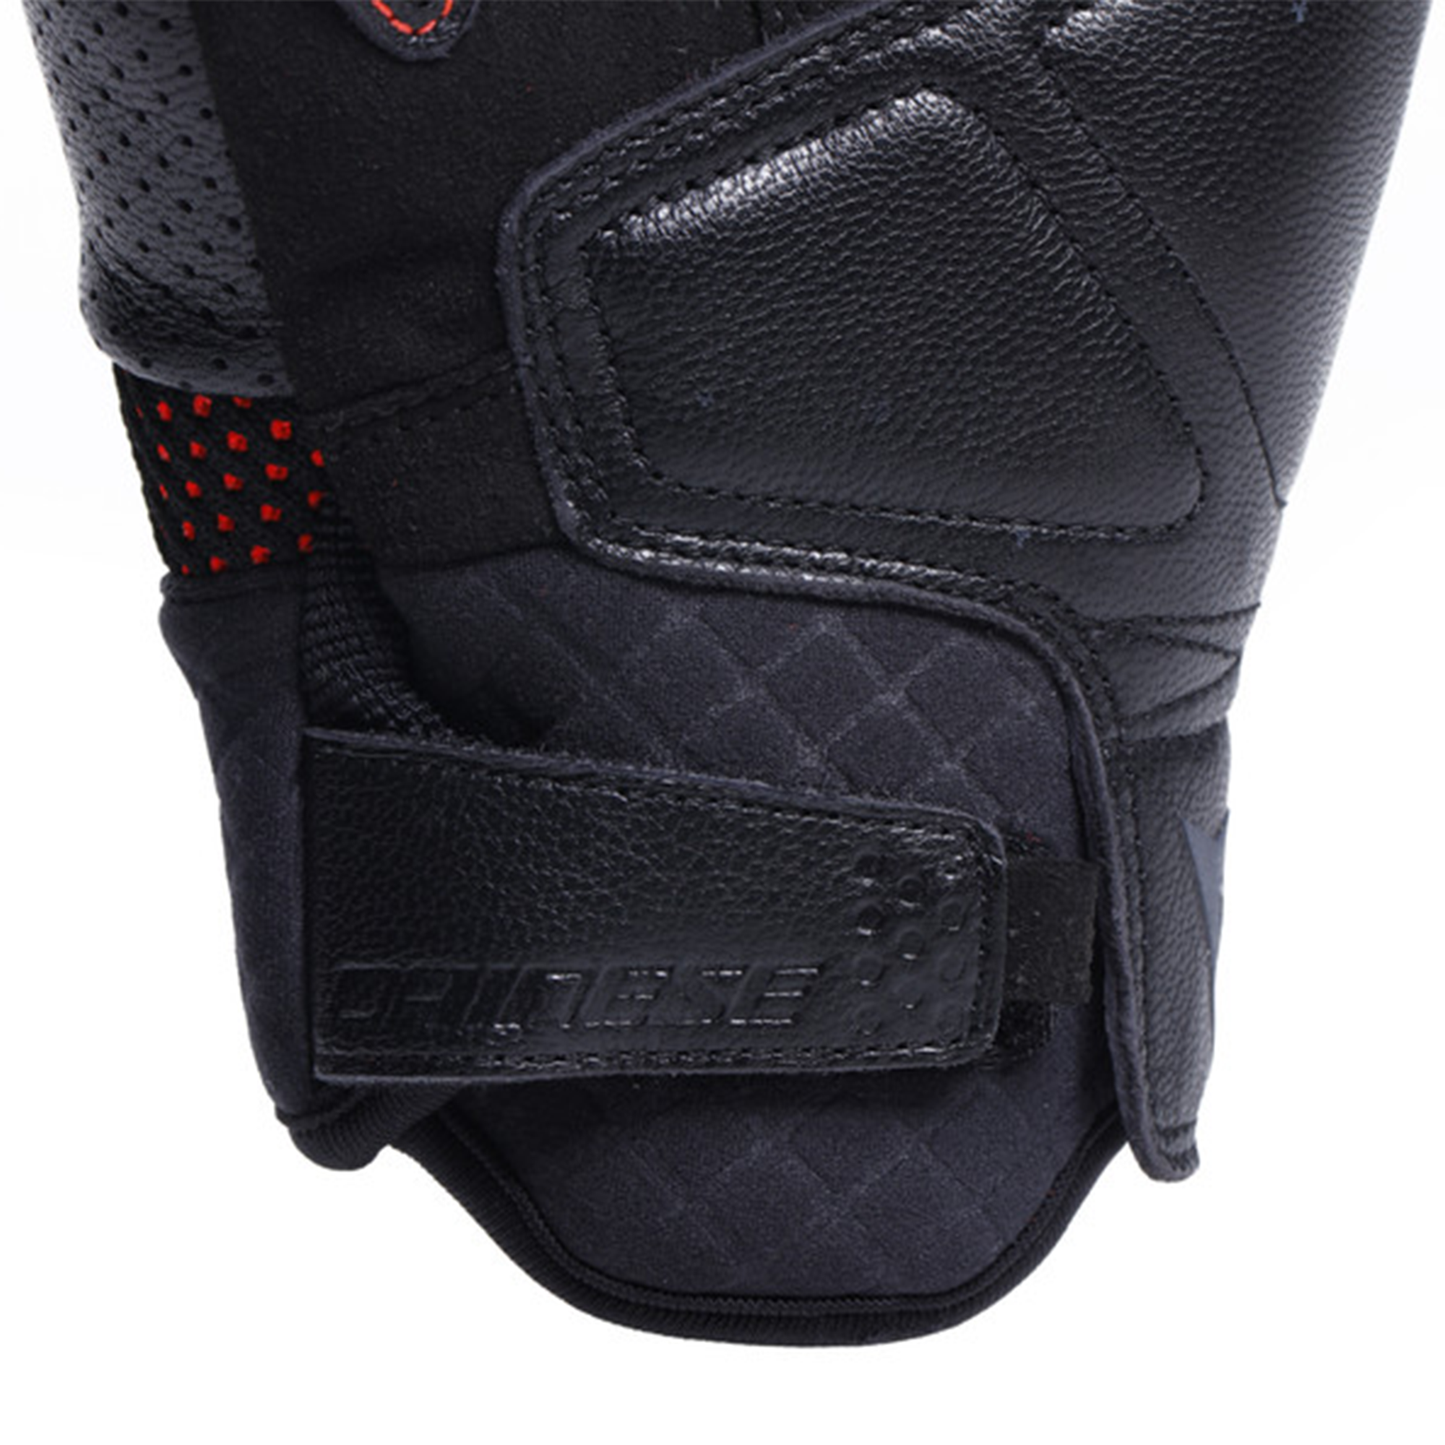 Dainese Unruly Ergo-Tec Gloves - Black/Flo Red (628)